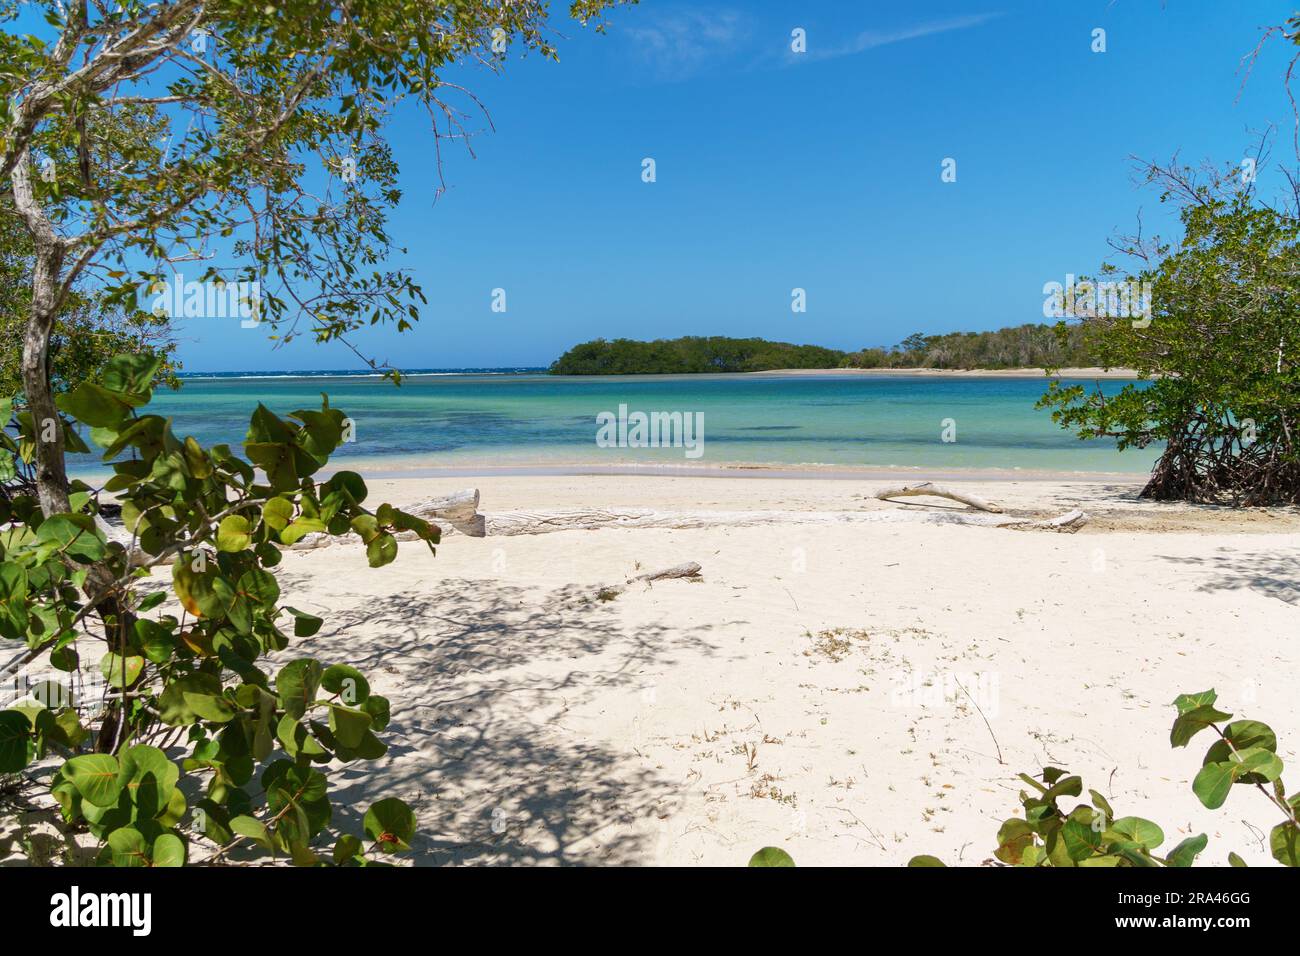 Empty strand of beach in estero hondo dominican republic, with fine sand and a distant island. Green foliage frames the picture. Stock Photo